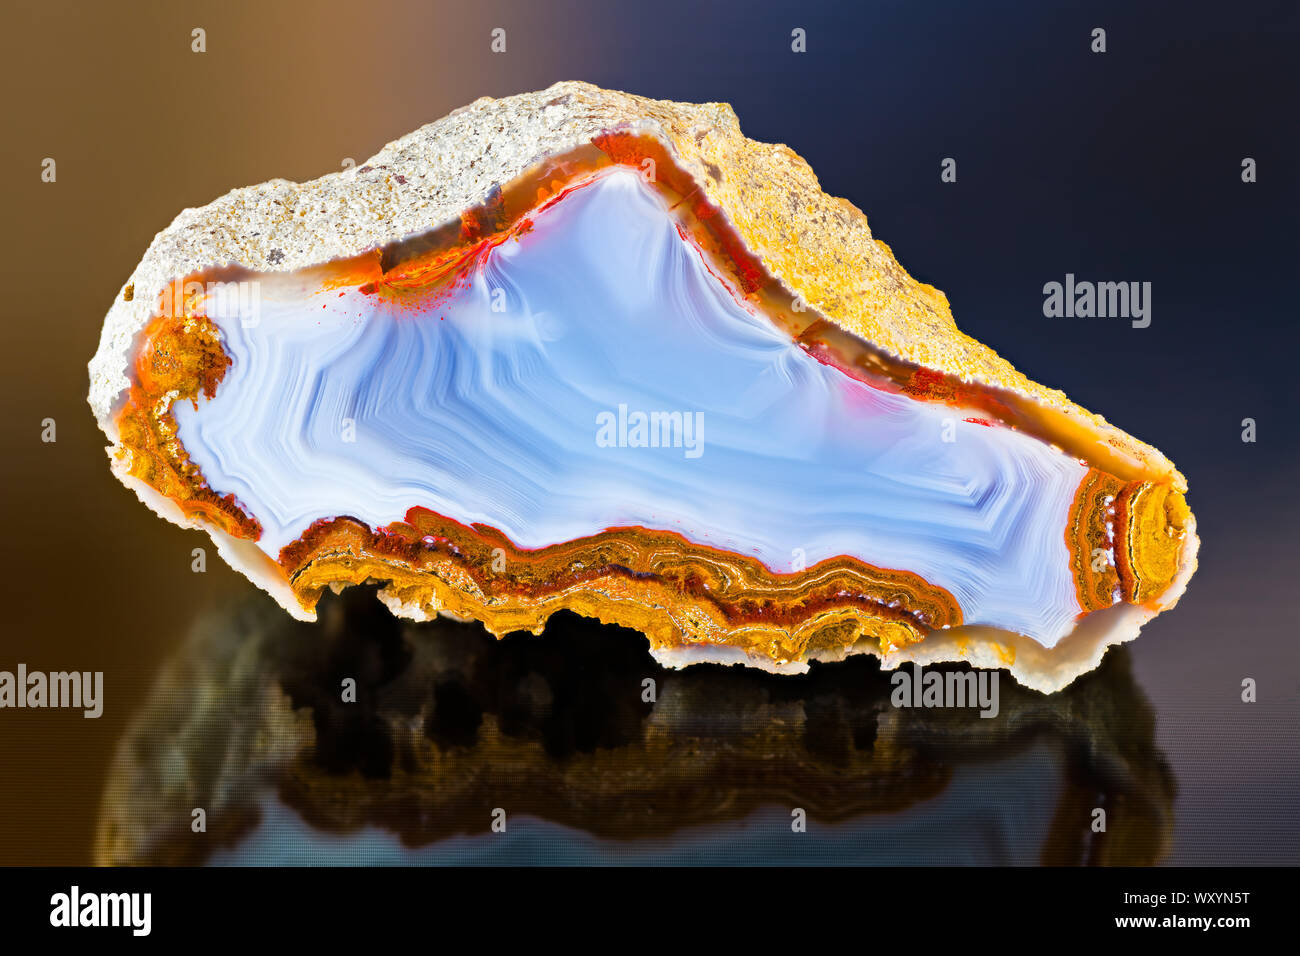 Polished agate cross section detail with reflection on dark shiny ...